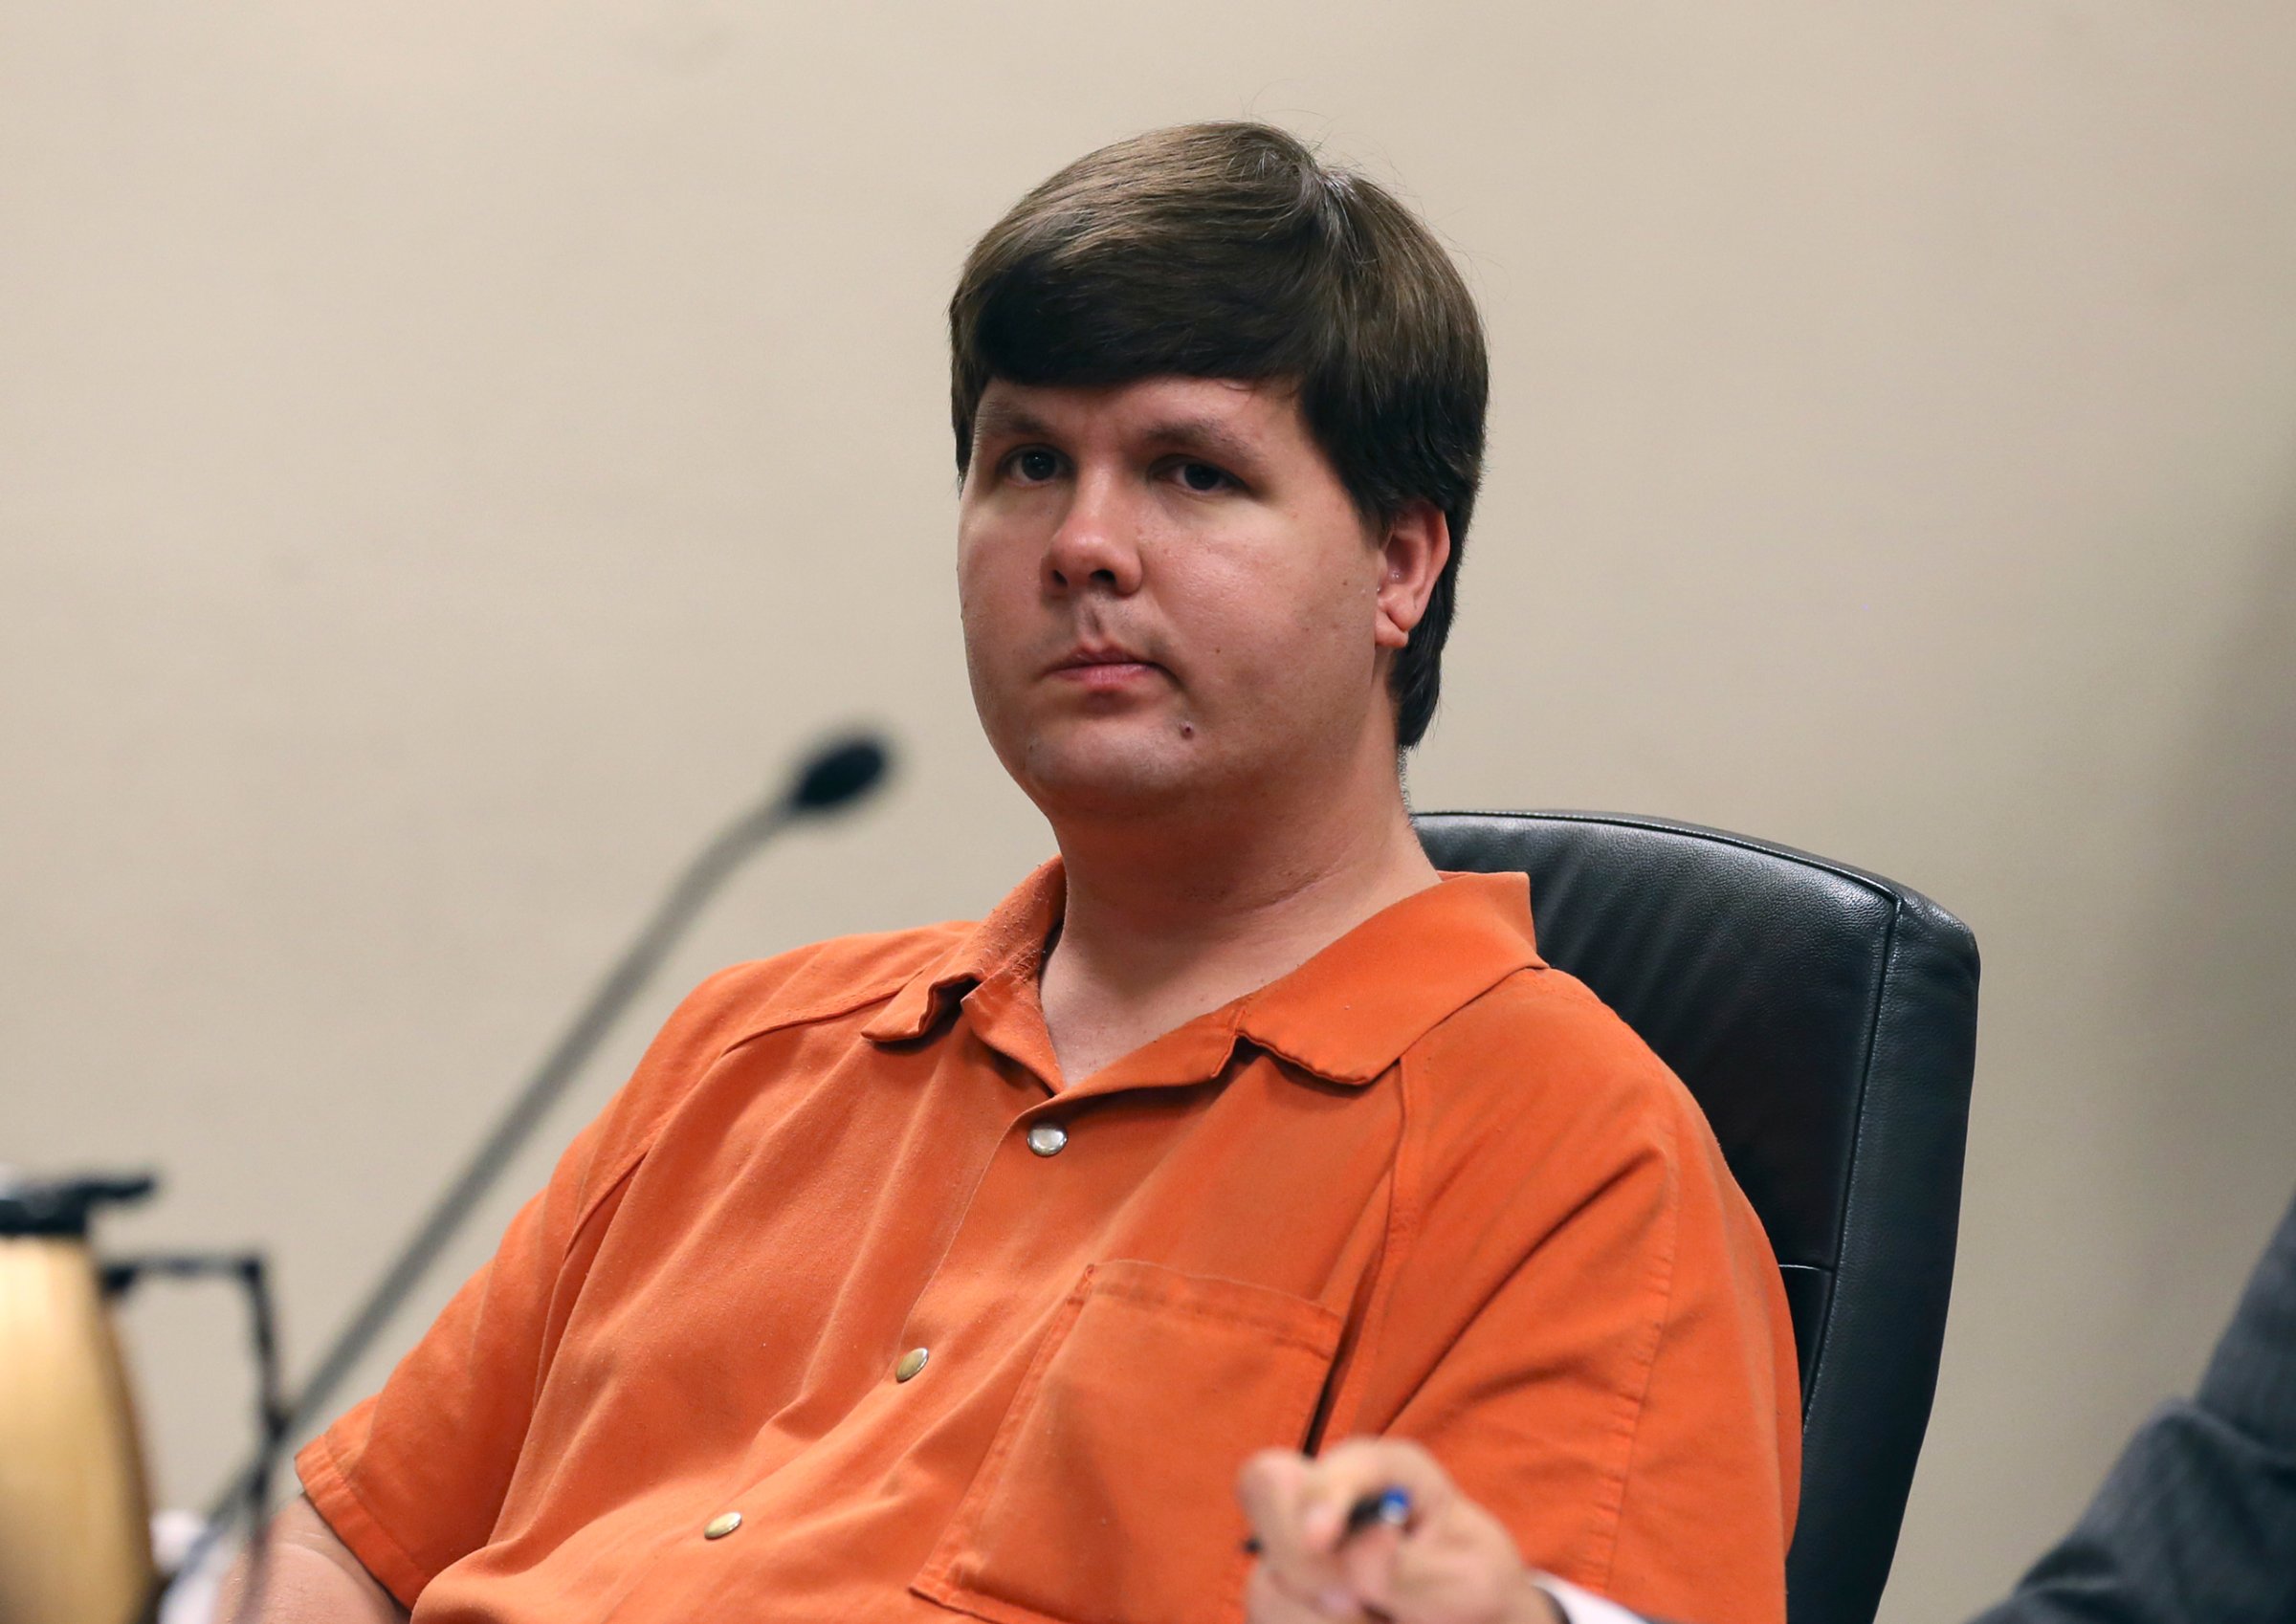 Justin Ross Harris sits in Cobb County Magistrate Court in Marietta, Georgia July 3, 2014. A judge denied bail on Thursday for Harris who prosecutors said intentionally left his 22-month-old son strapped inside a hot car to die because he wanted to live a child-free life. REUTERS/Kelly Huff /Pool (UNITED STATES - Tags: CRIME LAW) - RTR3X0UJ